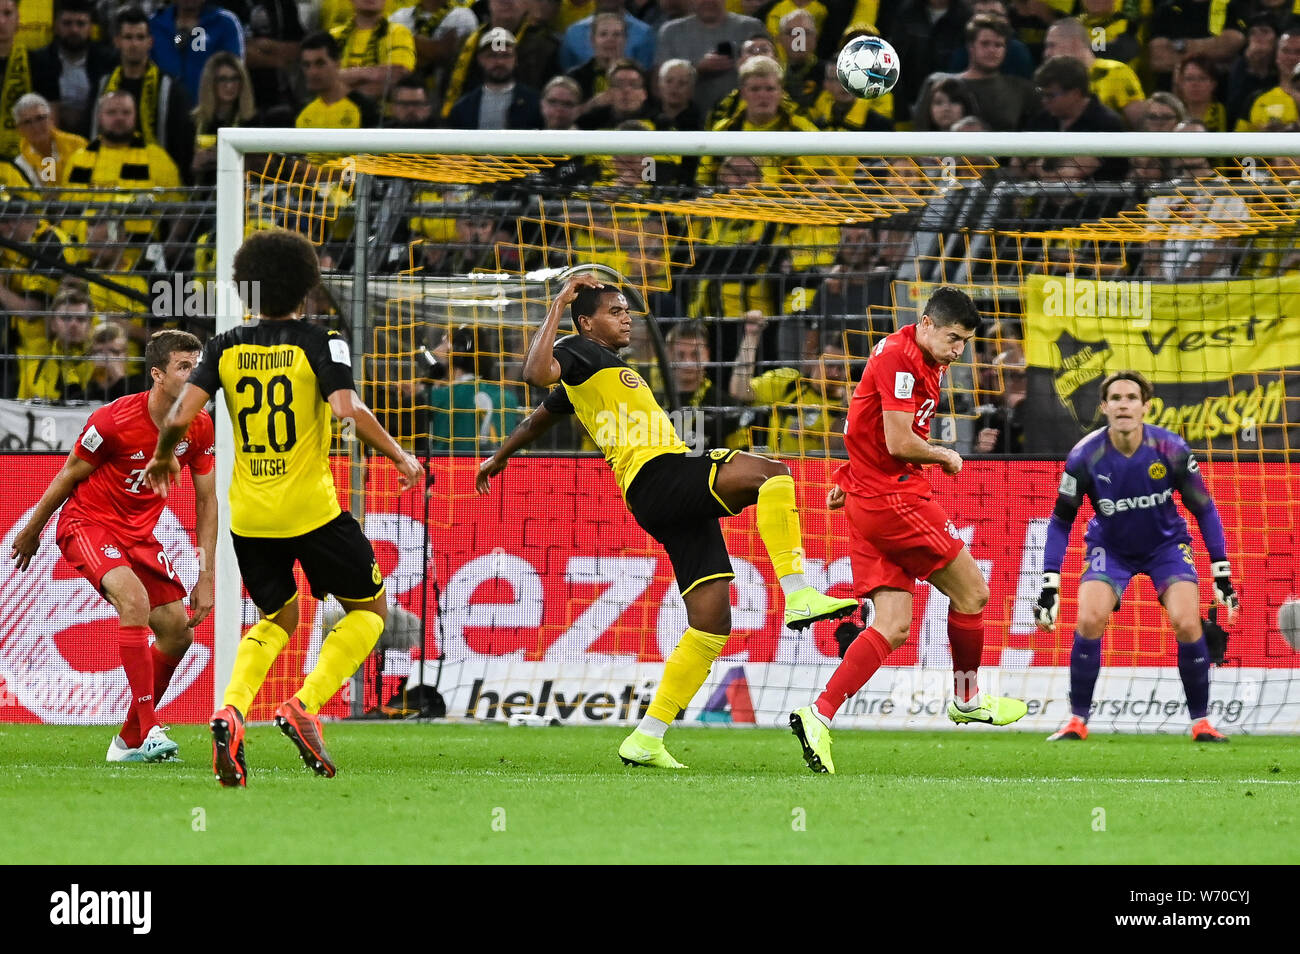 Jadon Sancho from Borussia Dortmund (L) and Robert Lewandowski from Bayern Munich (R) are seen in action during the Germany Supercup Final 2019 match between Borussia Dortmund and Bayern Munich.(Final score: Borussia Dortmund 2:0 Bayern Munich) Stock Photo